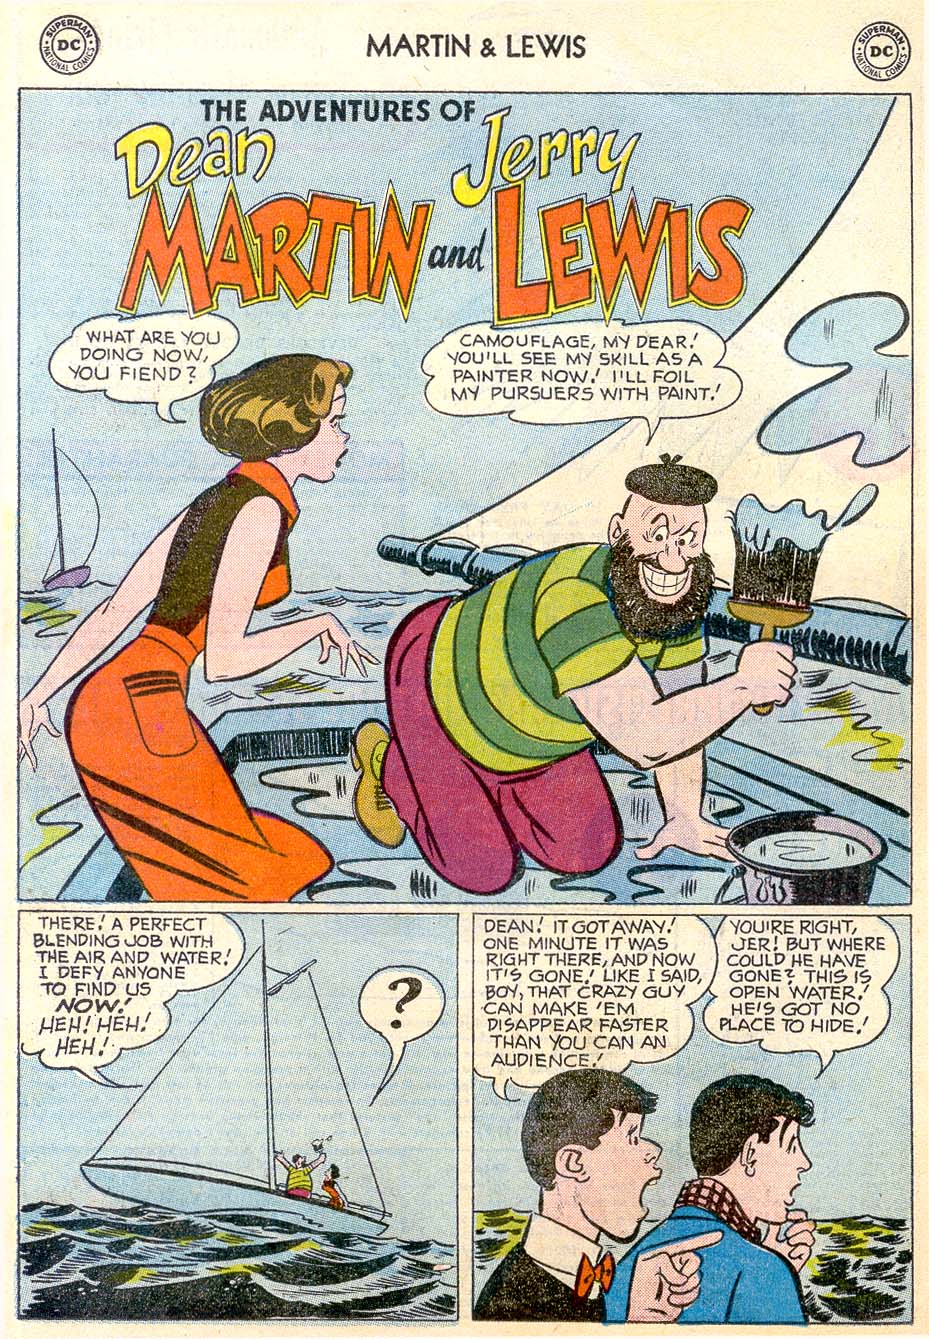 Read online The Adventures of Dean Martin and Jerry Lewis comic -  Issue #40 - 22